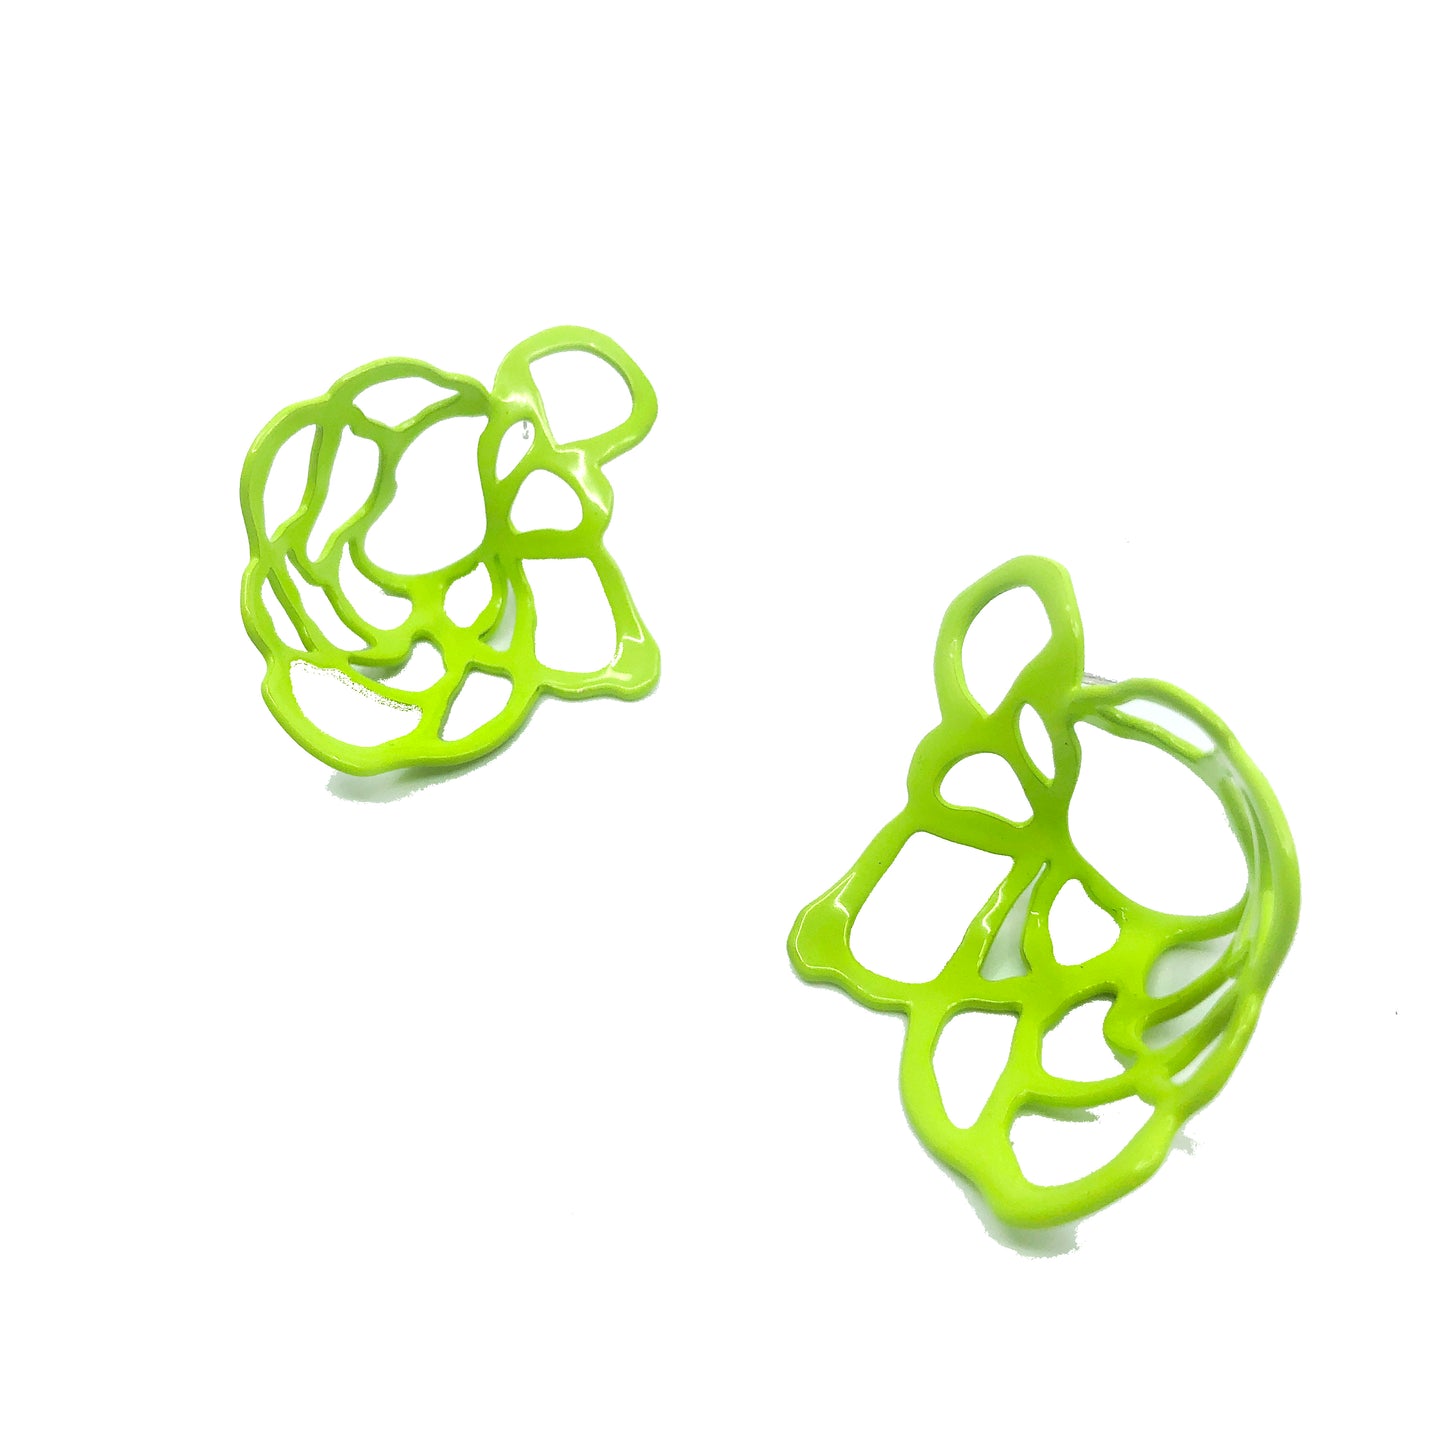 Chartreuse lace stud earrings on white background.